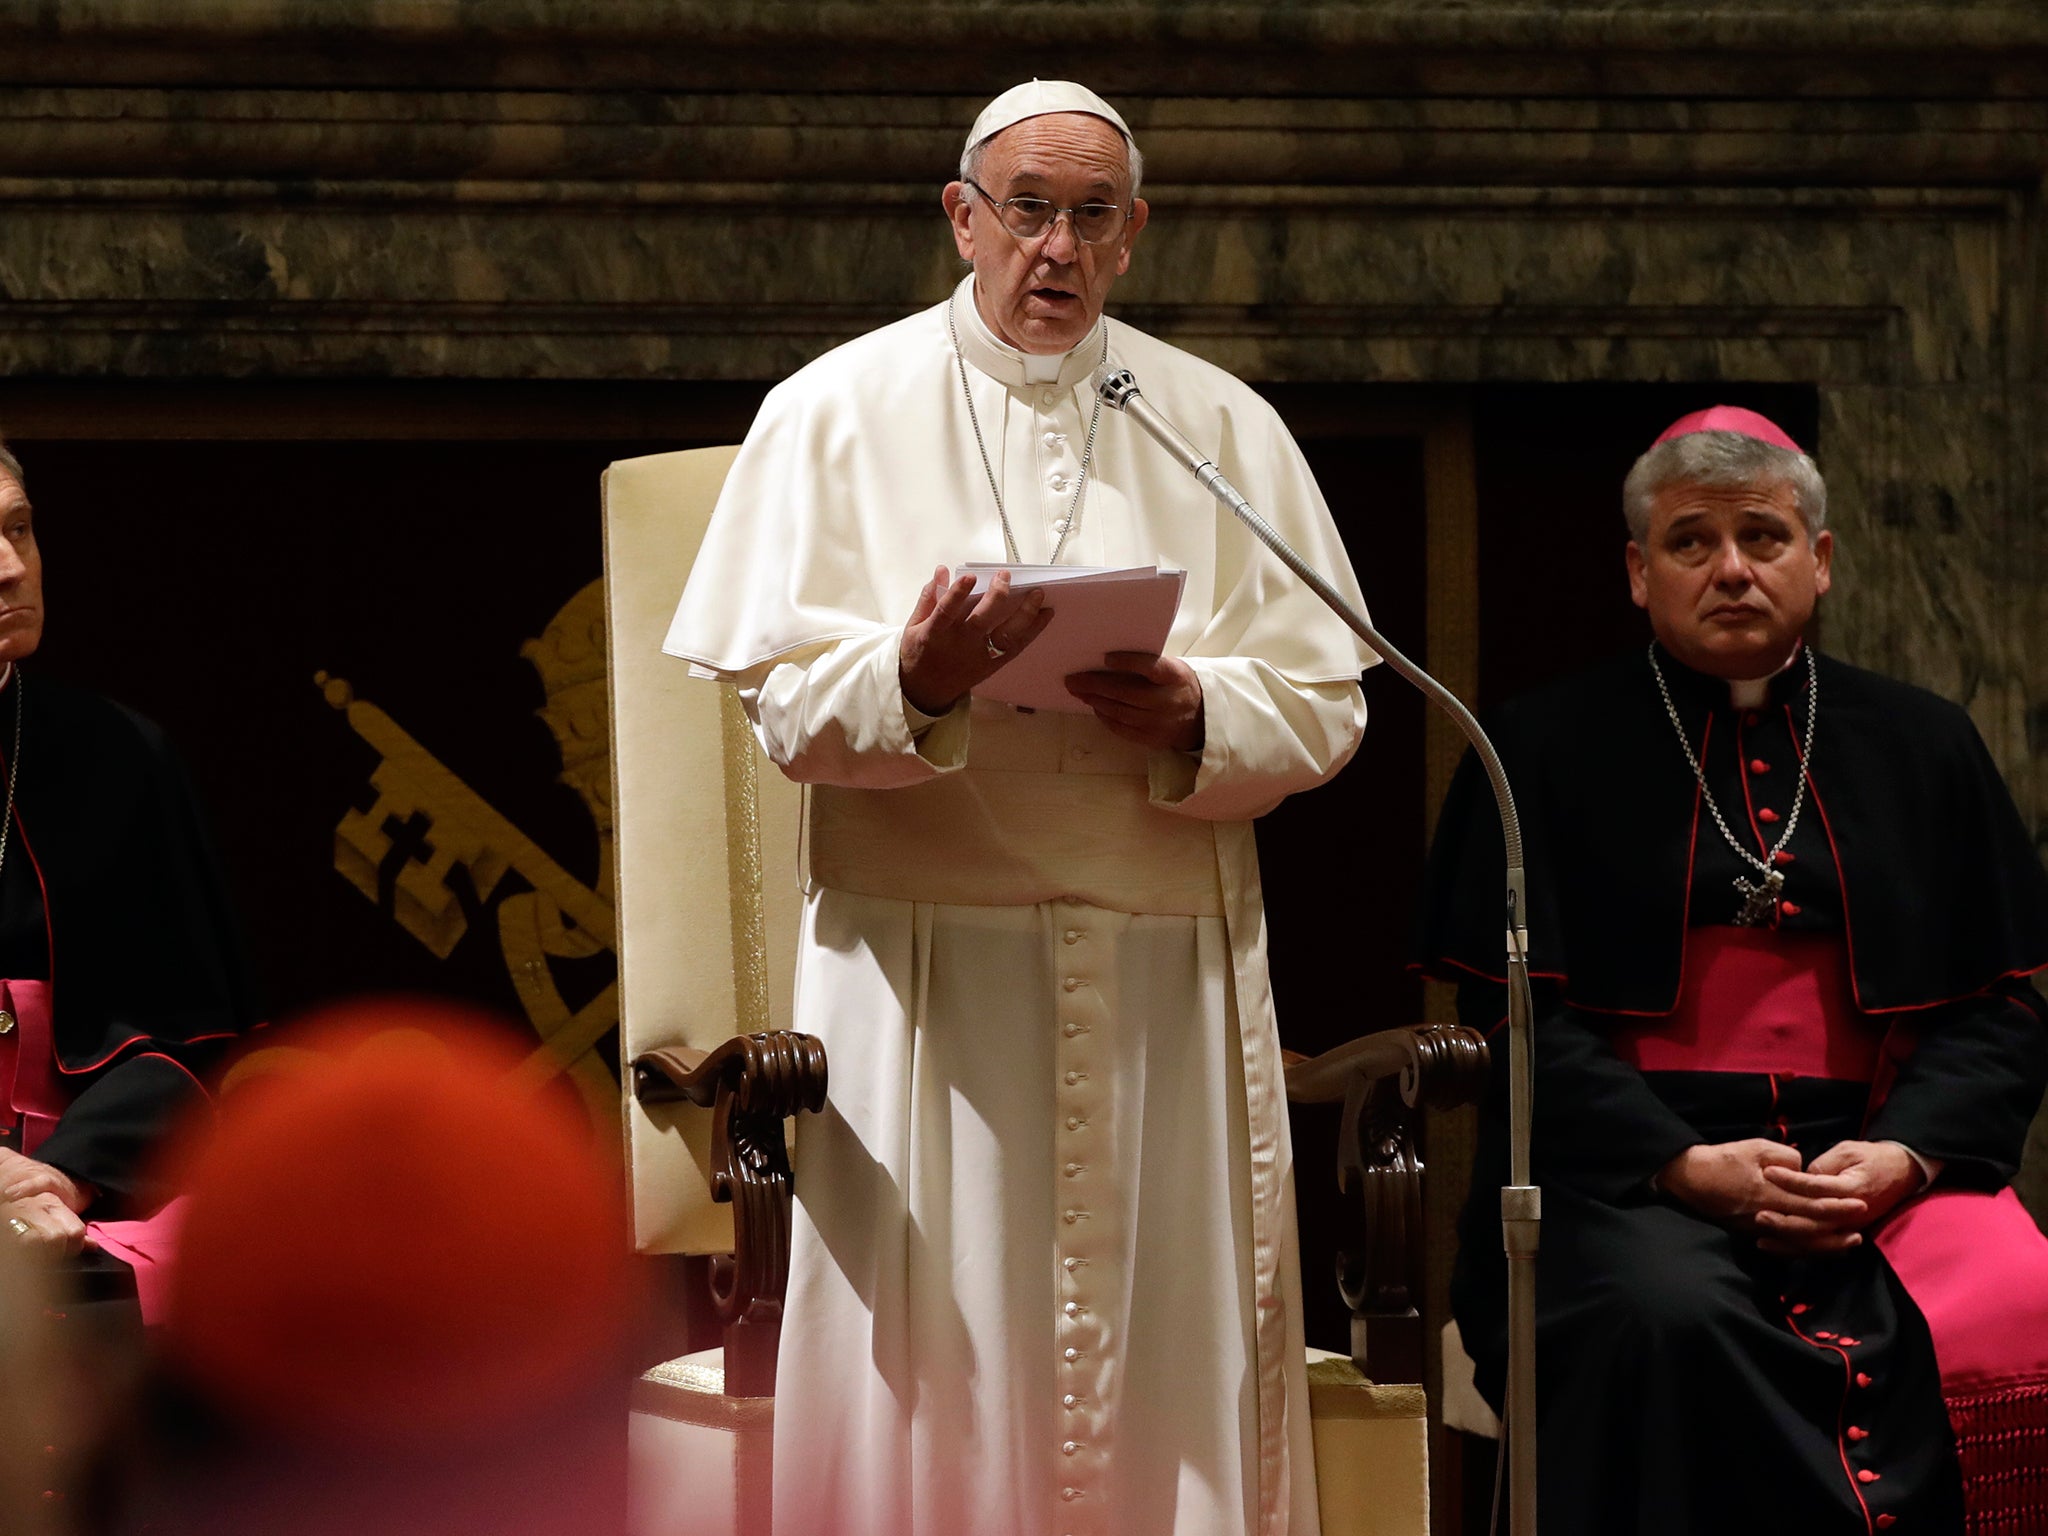 Pope Francis speaks on the occasion of his Christmas greetings to the Roman Curia in the Clementine Hall